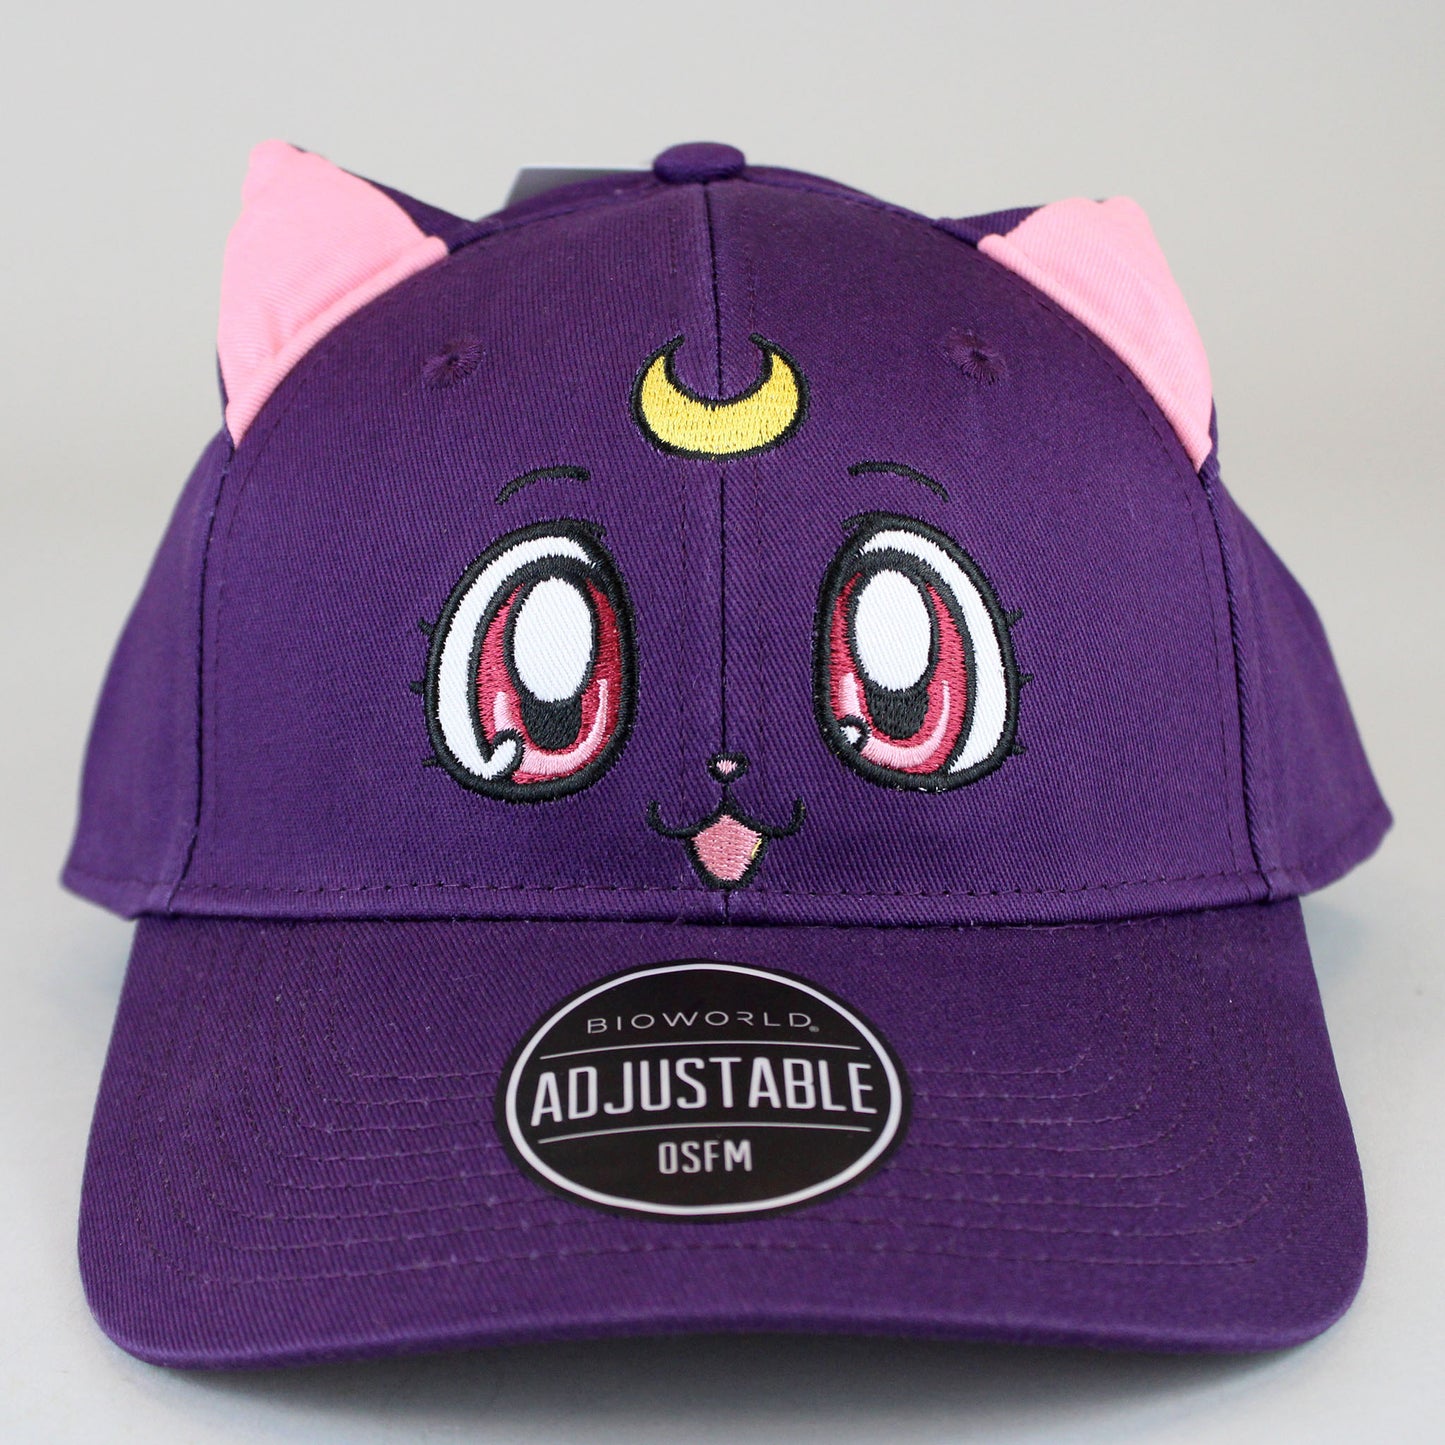 Luna (Sailor Moon Crystal) Cosplay Hat with Cat Ears